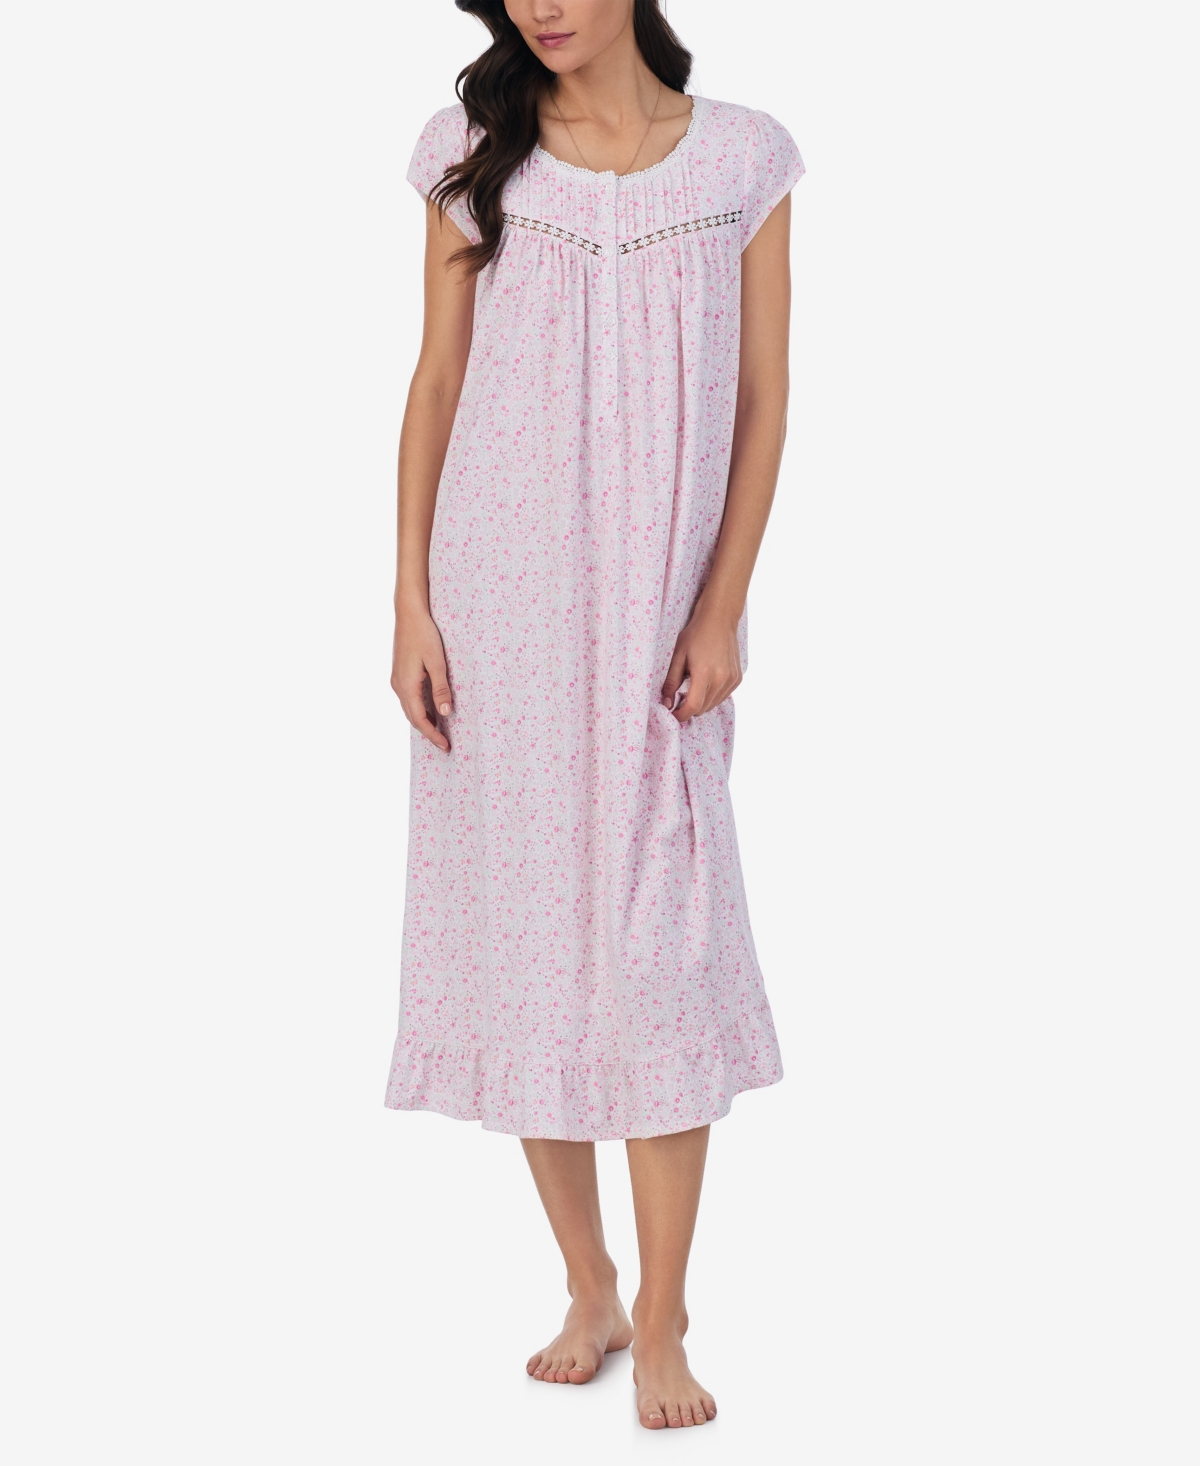 Women's Long Nightgown - Pink Ditsy Floral